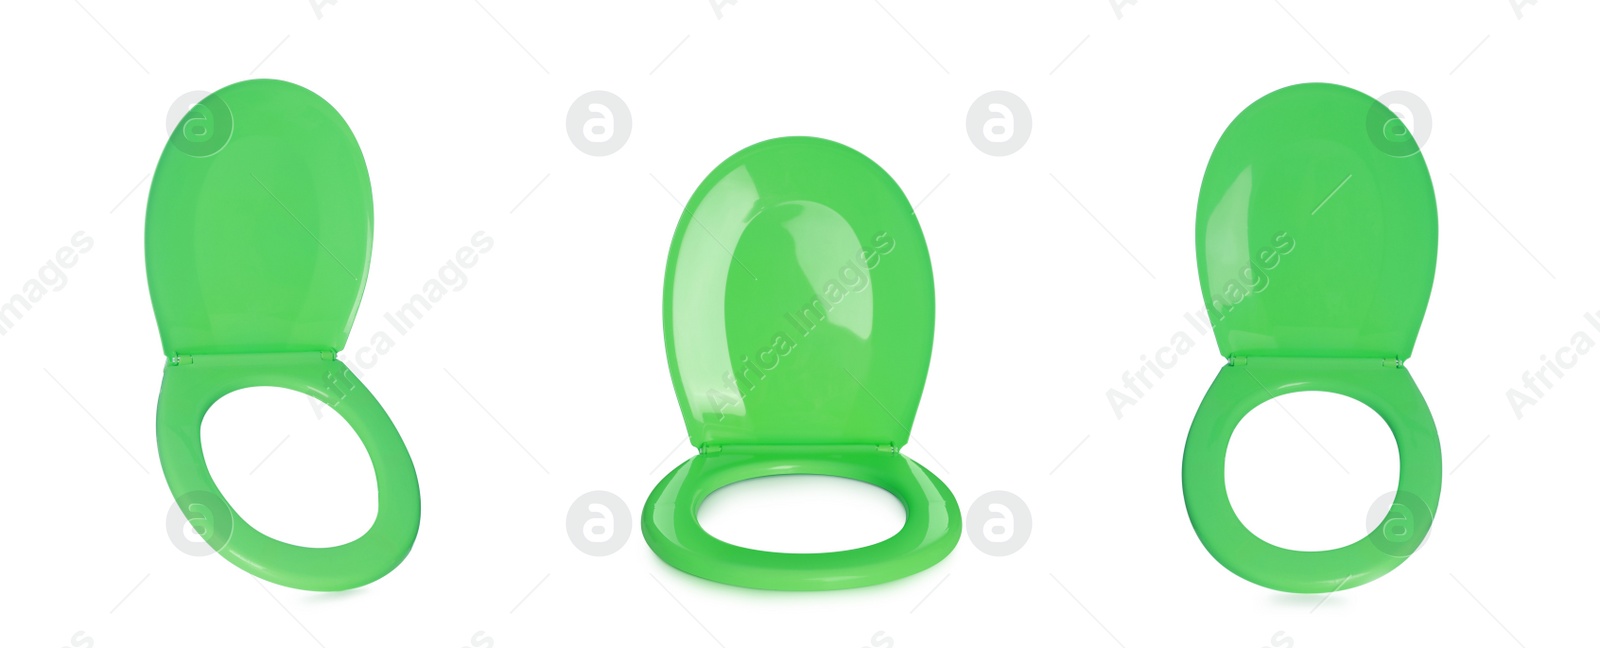 Image of Set with green plastic toilet seats on white background. Banner design